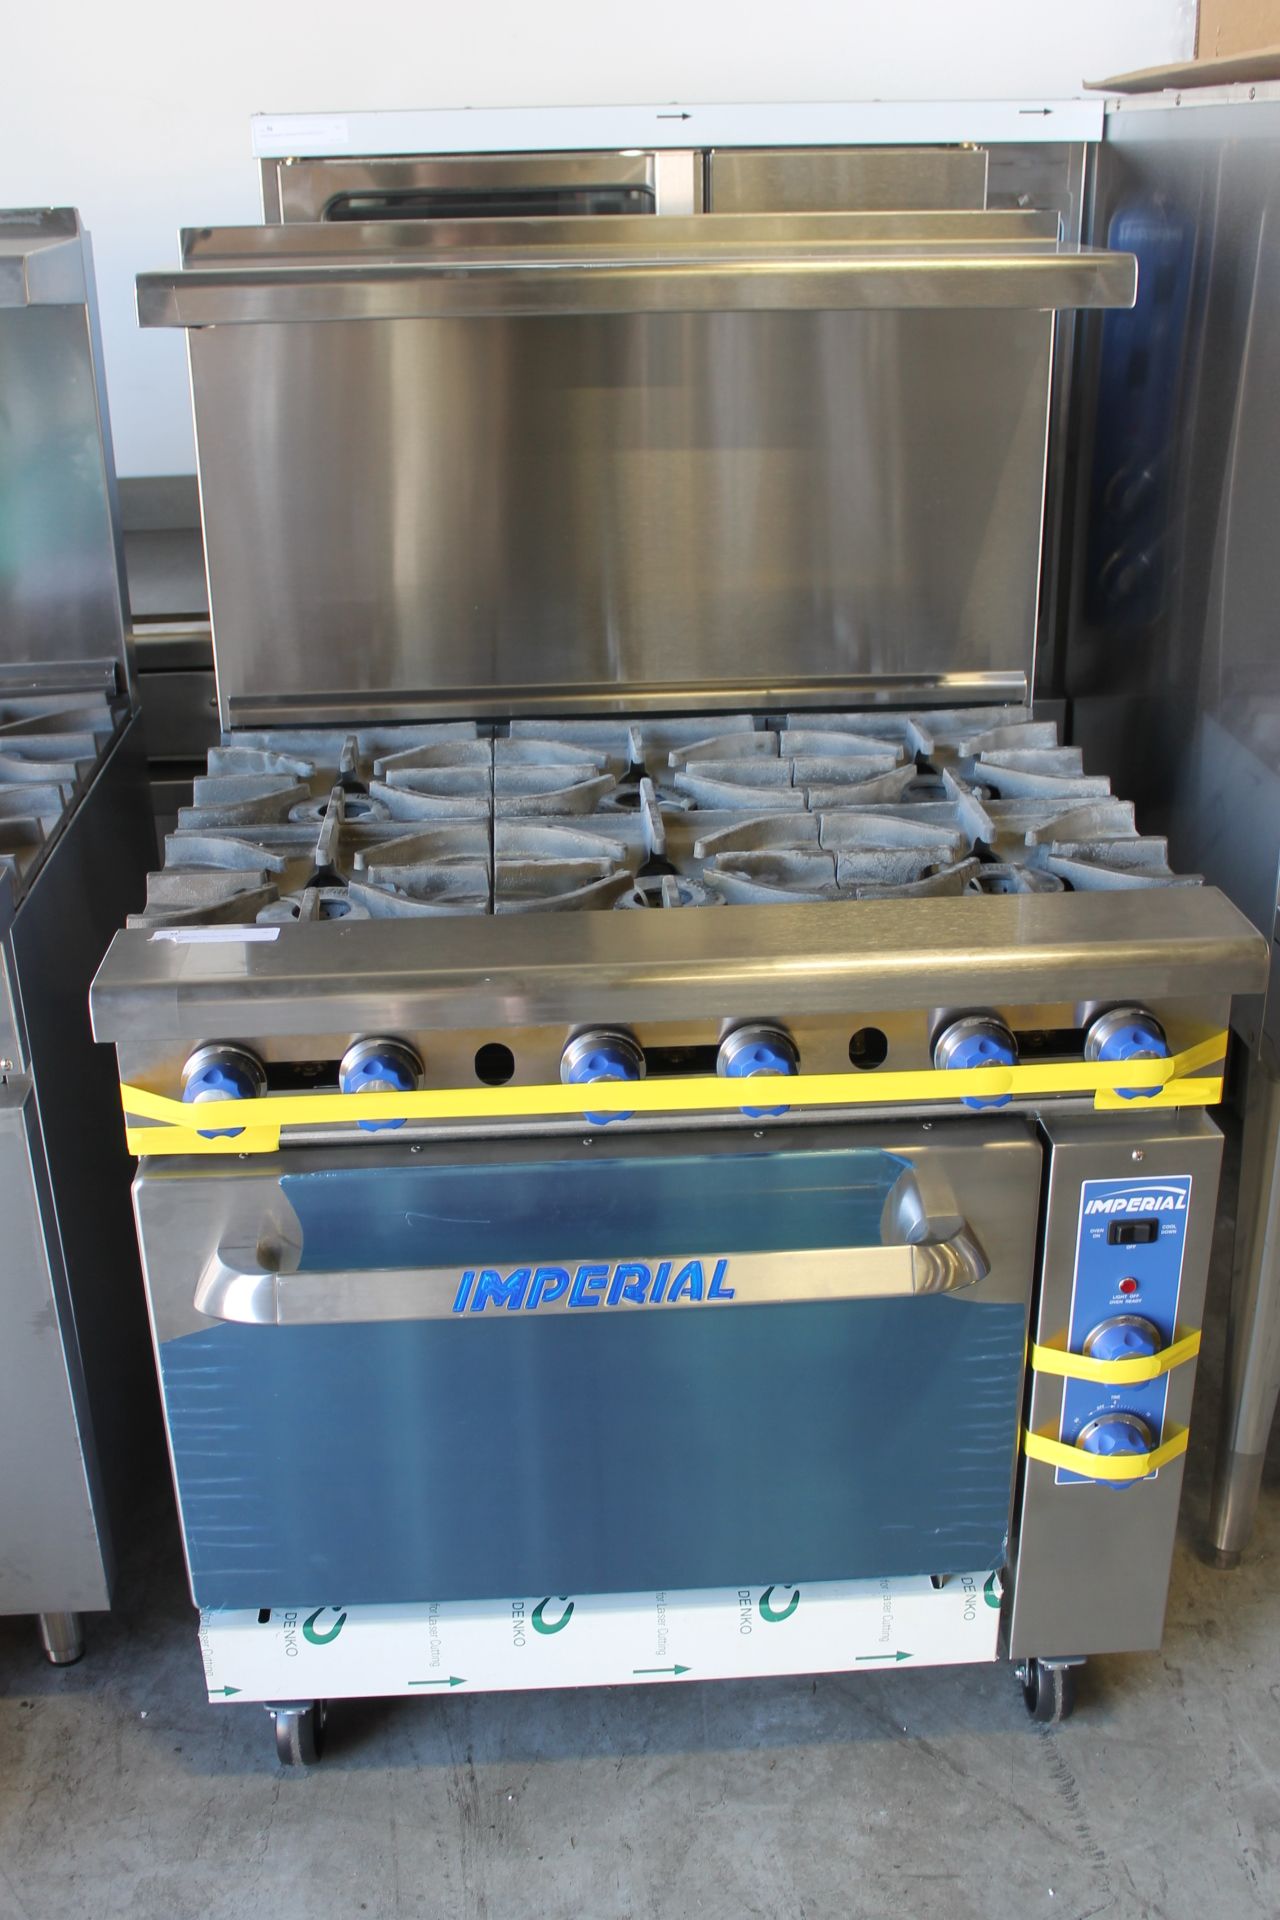 Imperial 6 Burner with Convection Oven model IR-6-C